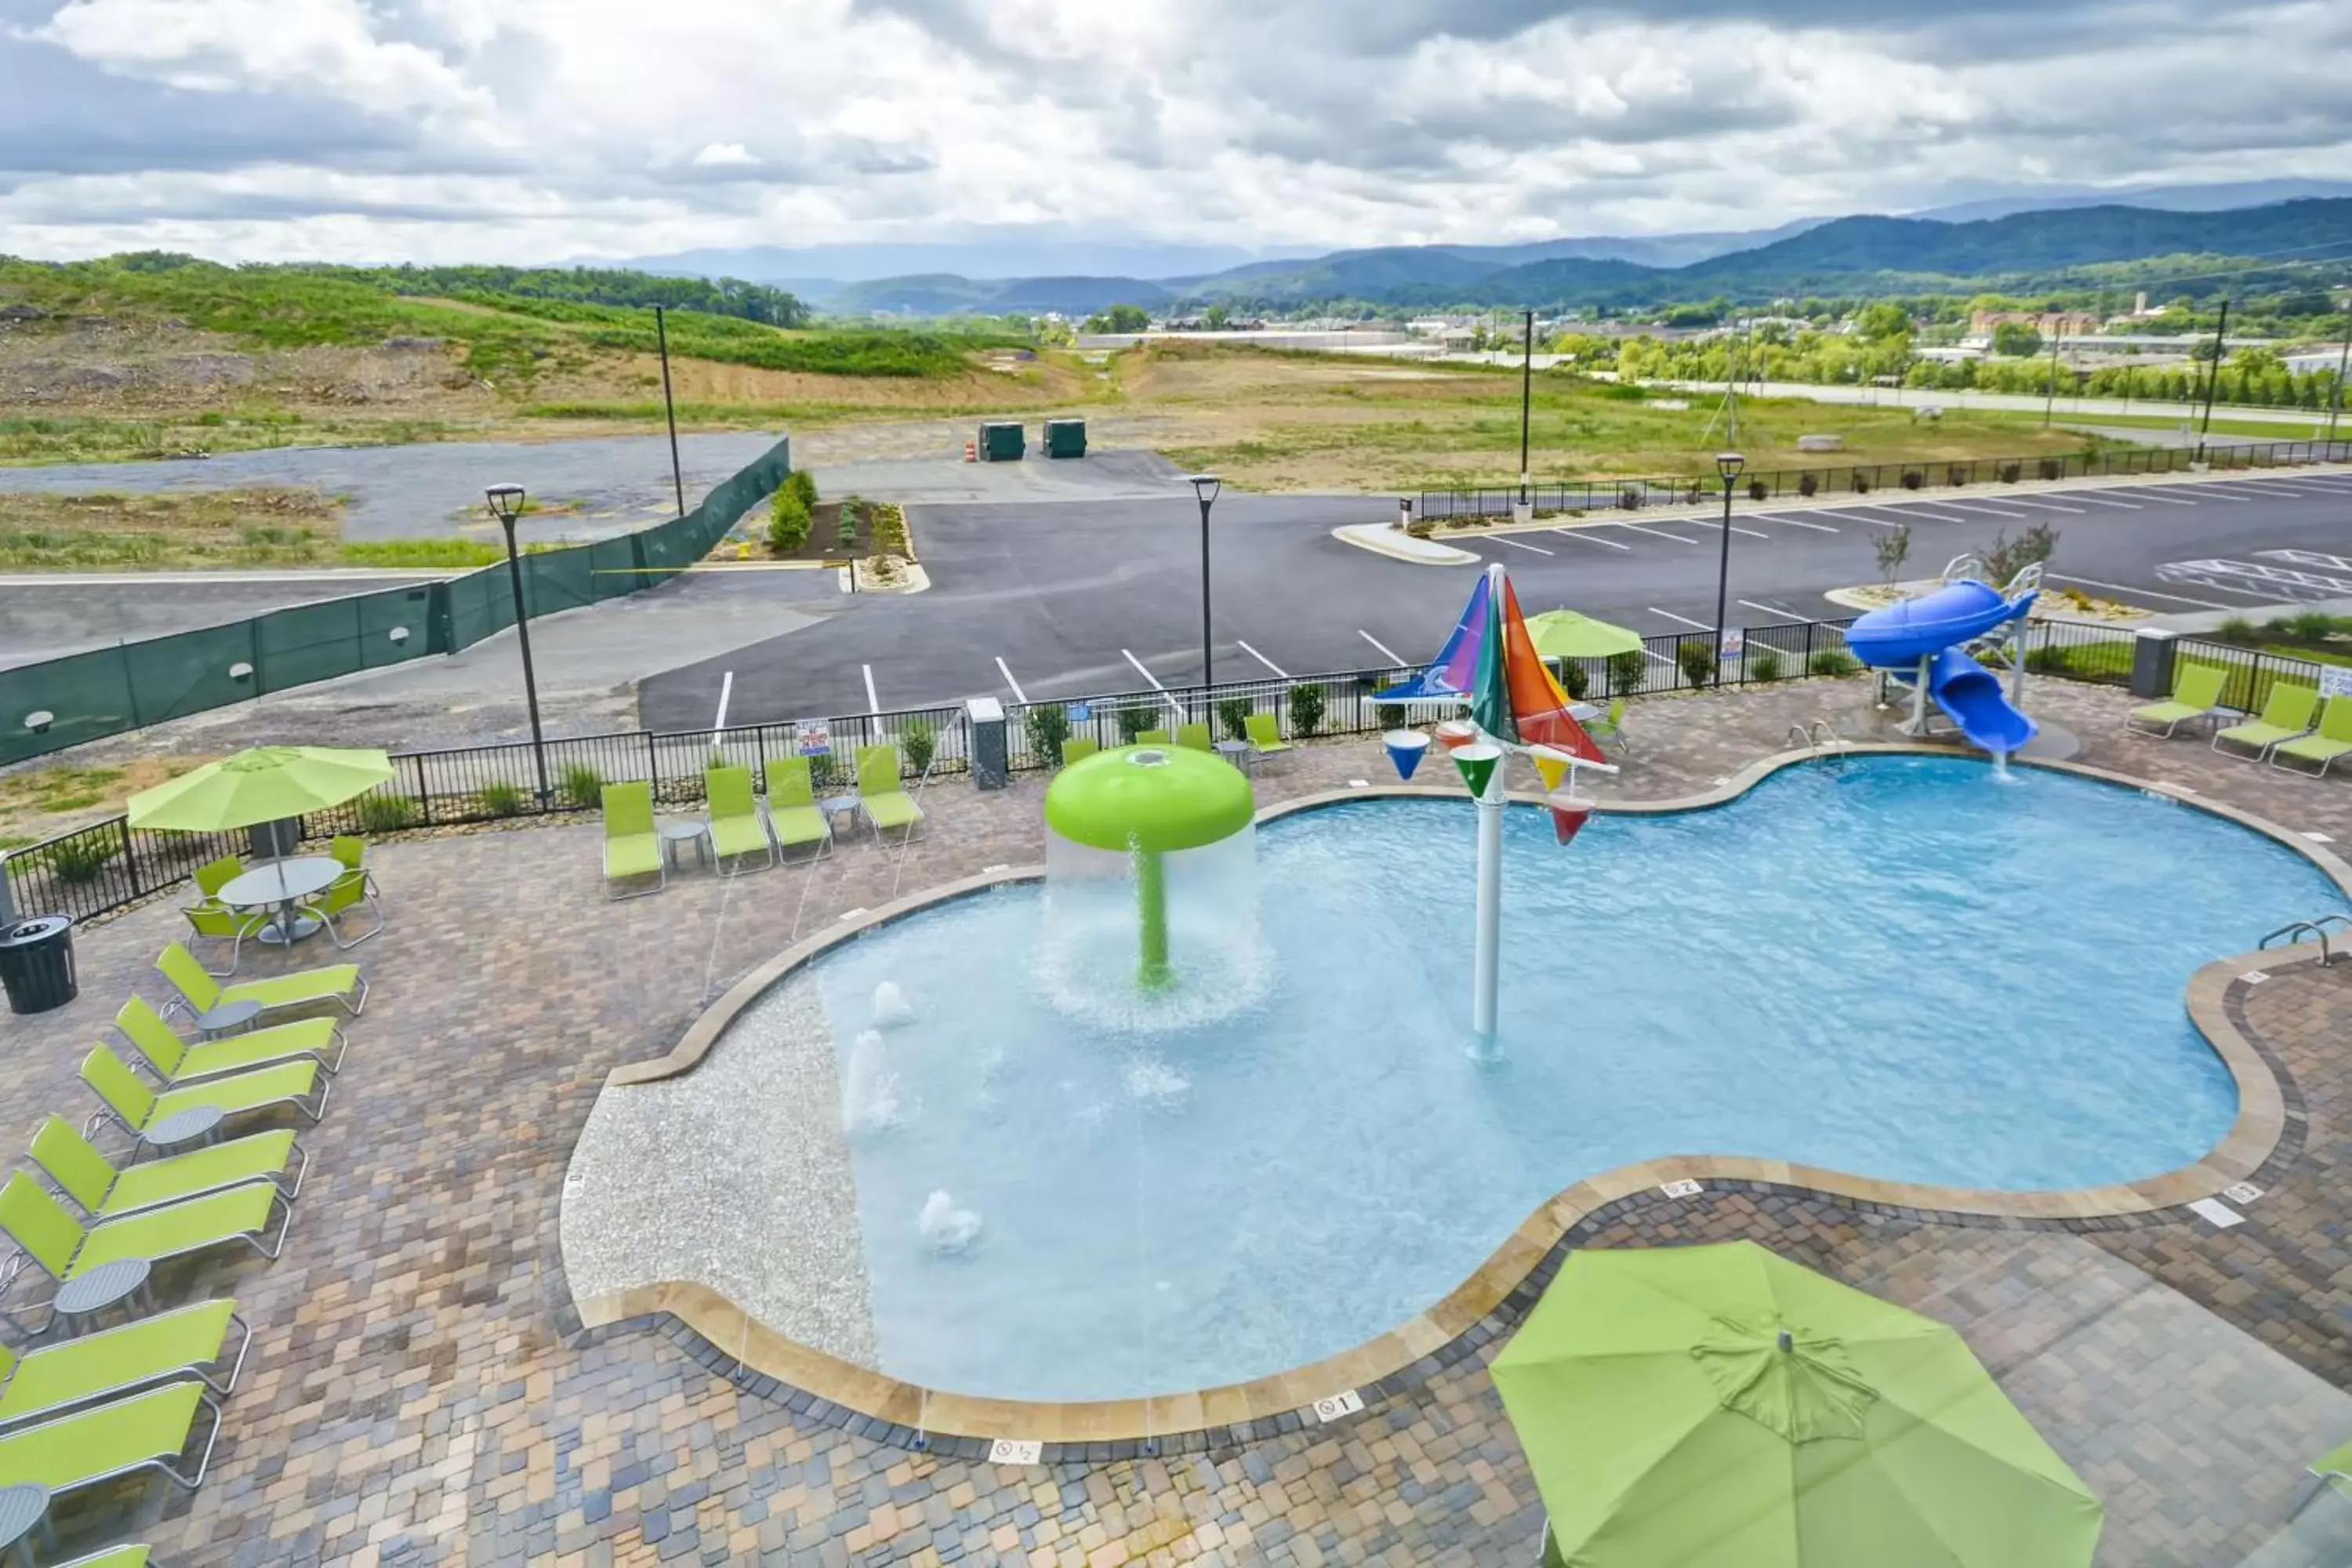 Pool View in Home2 Suites By Hilton Pigeon Forge